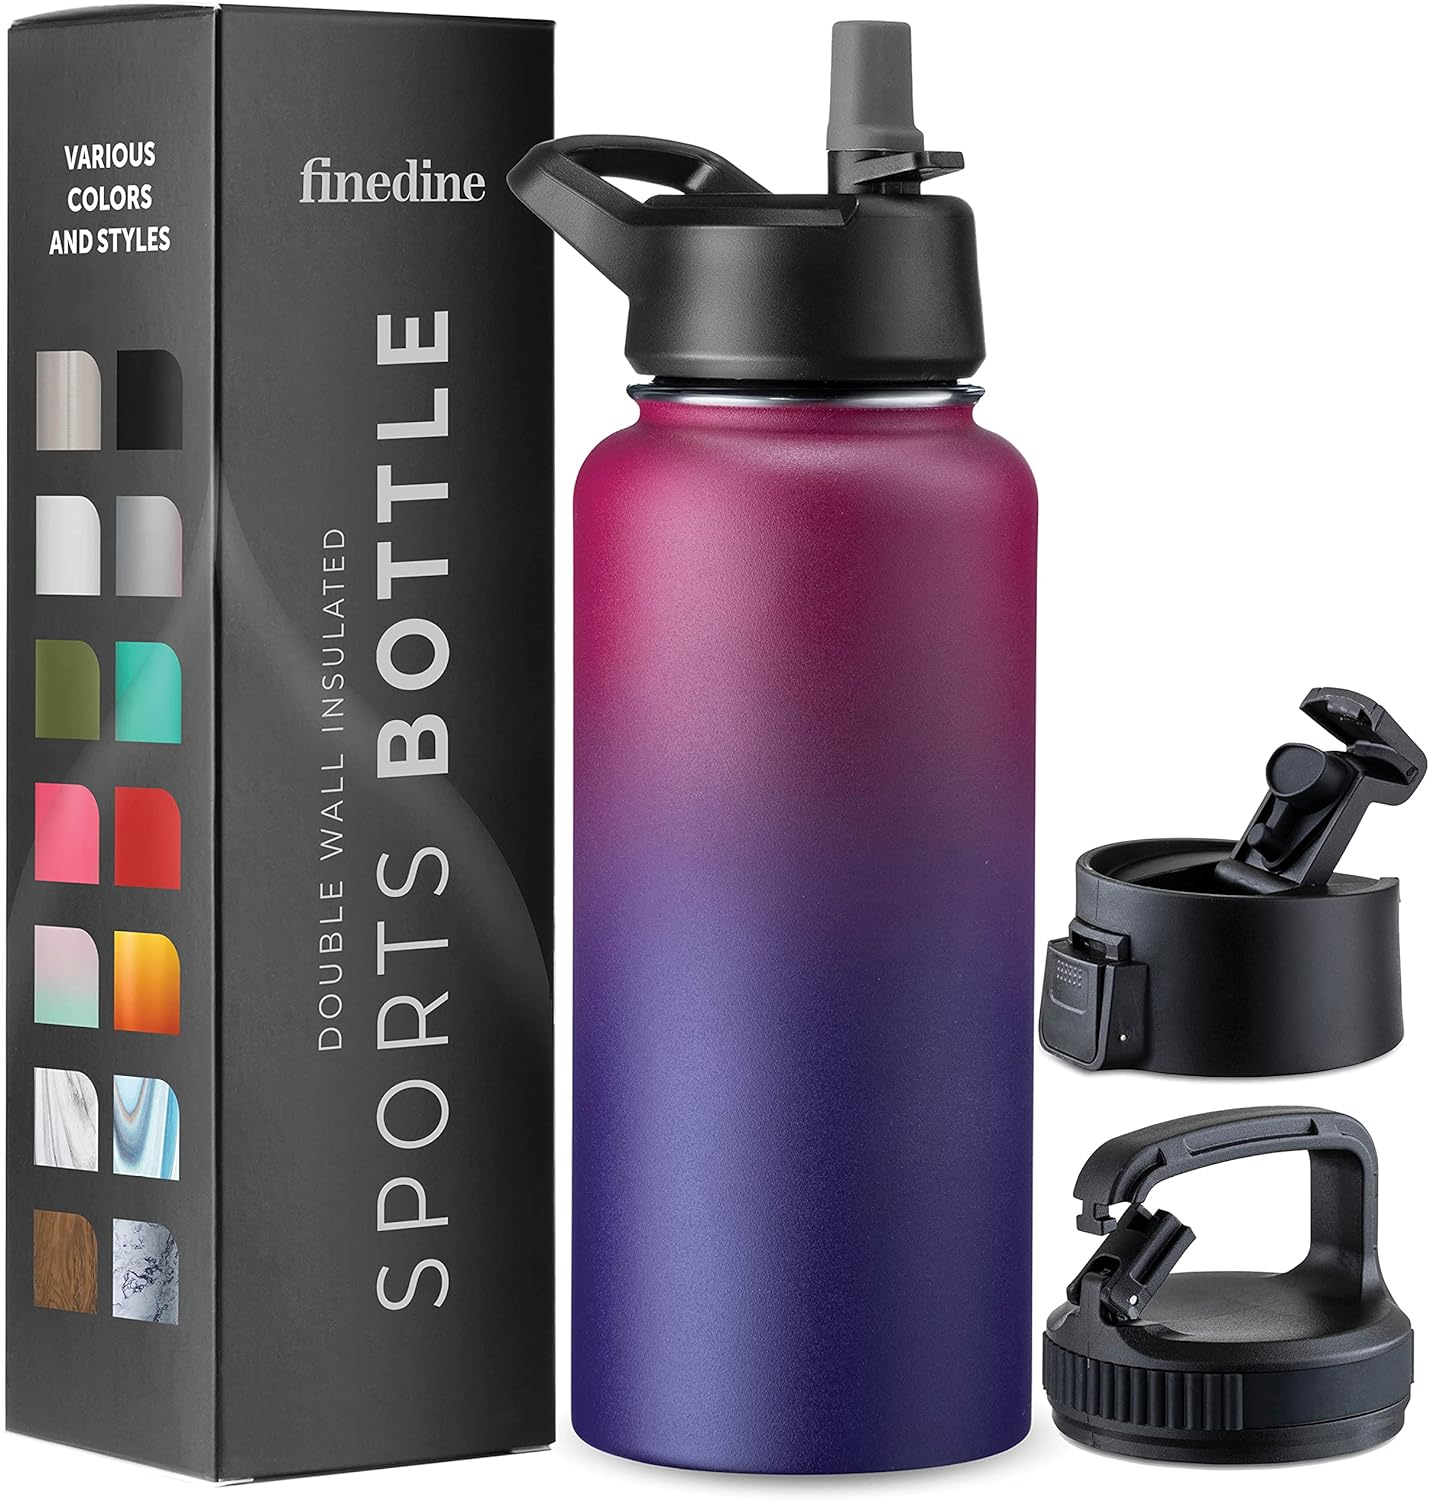 FineDine Insulated Water Bottles with Straw - 32 Oz Stainless Steel Metal Water Bottle W/ 3 Lids - Reusable for Travel, Camping, Bike, Sports - Dreamy Purple